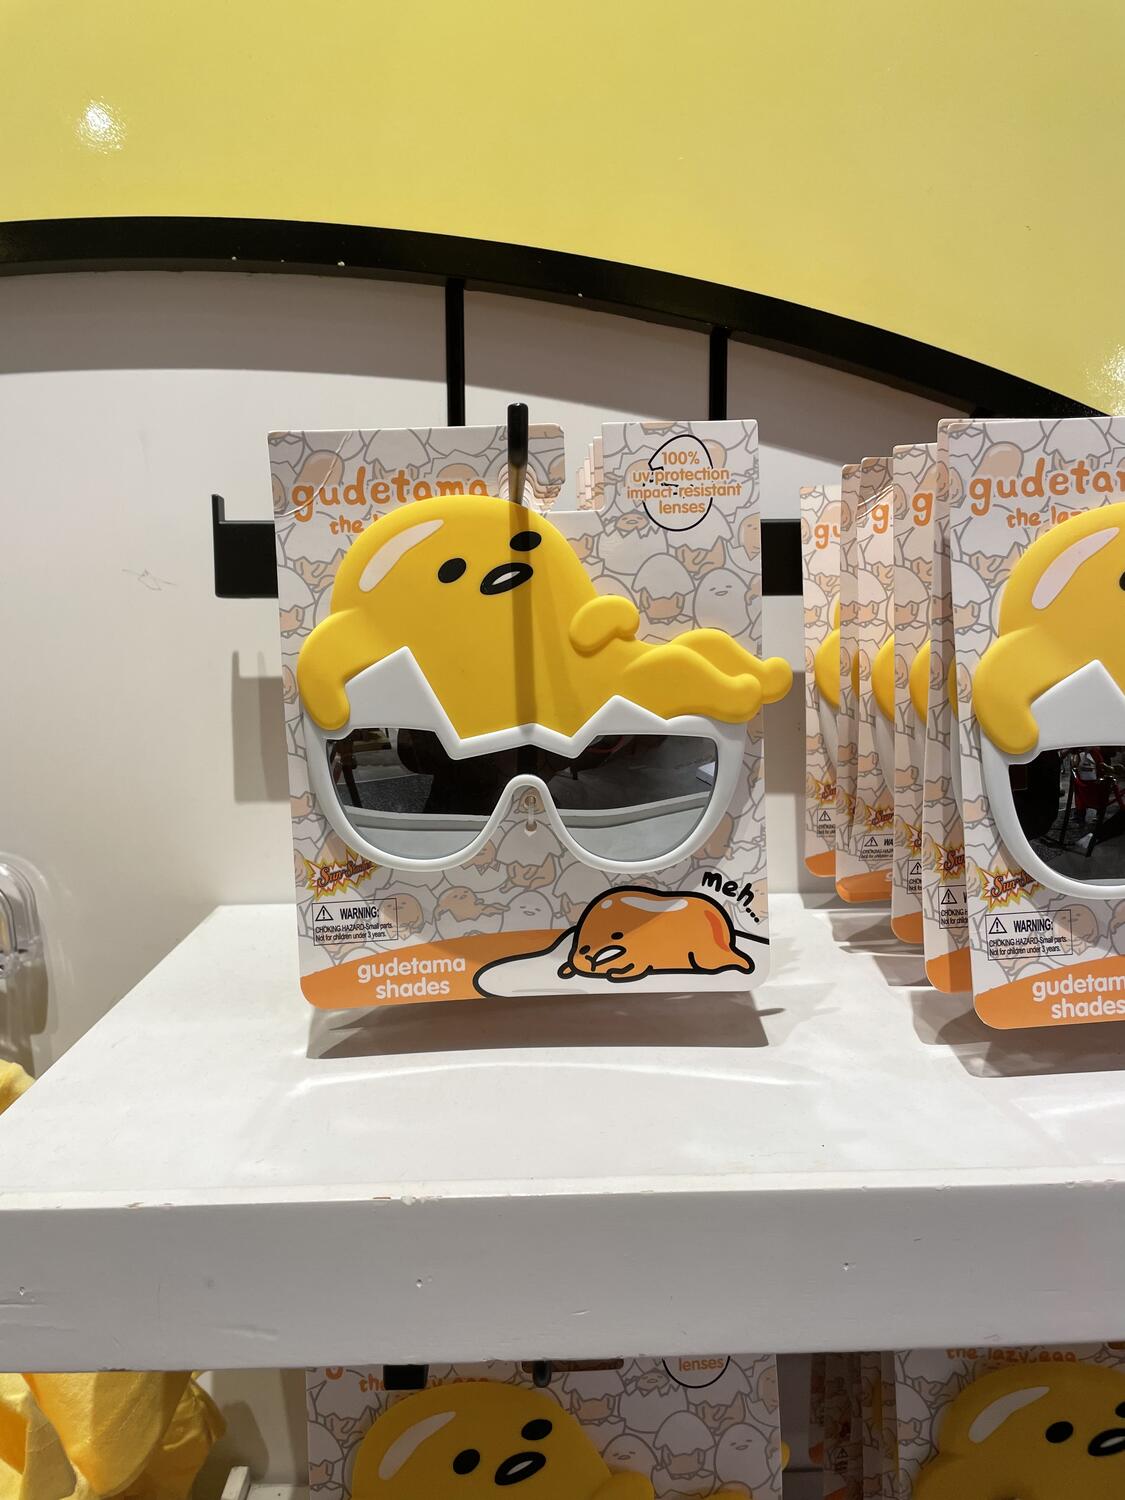 Sunglasses in the shape of Gudetama, the Sanrio character that is a fried egg. The lenses are the egg shell and Gudetama sits on your forehead.